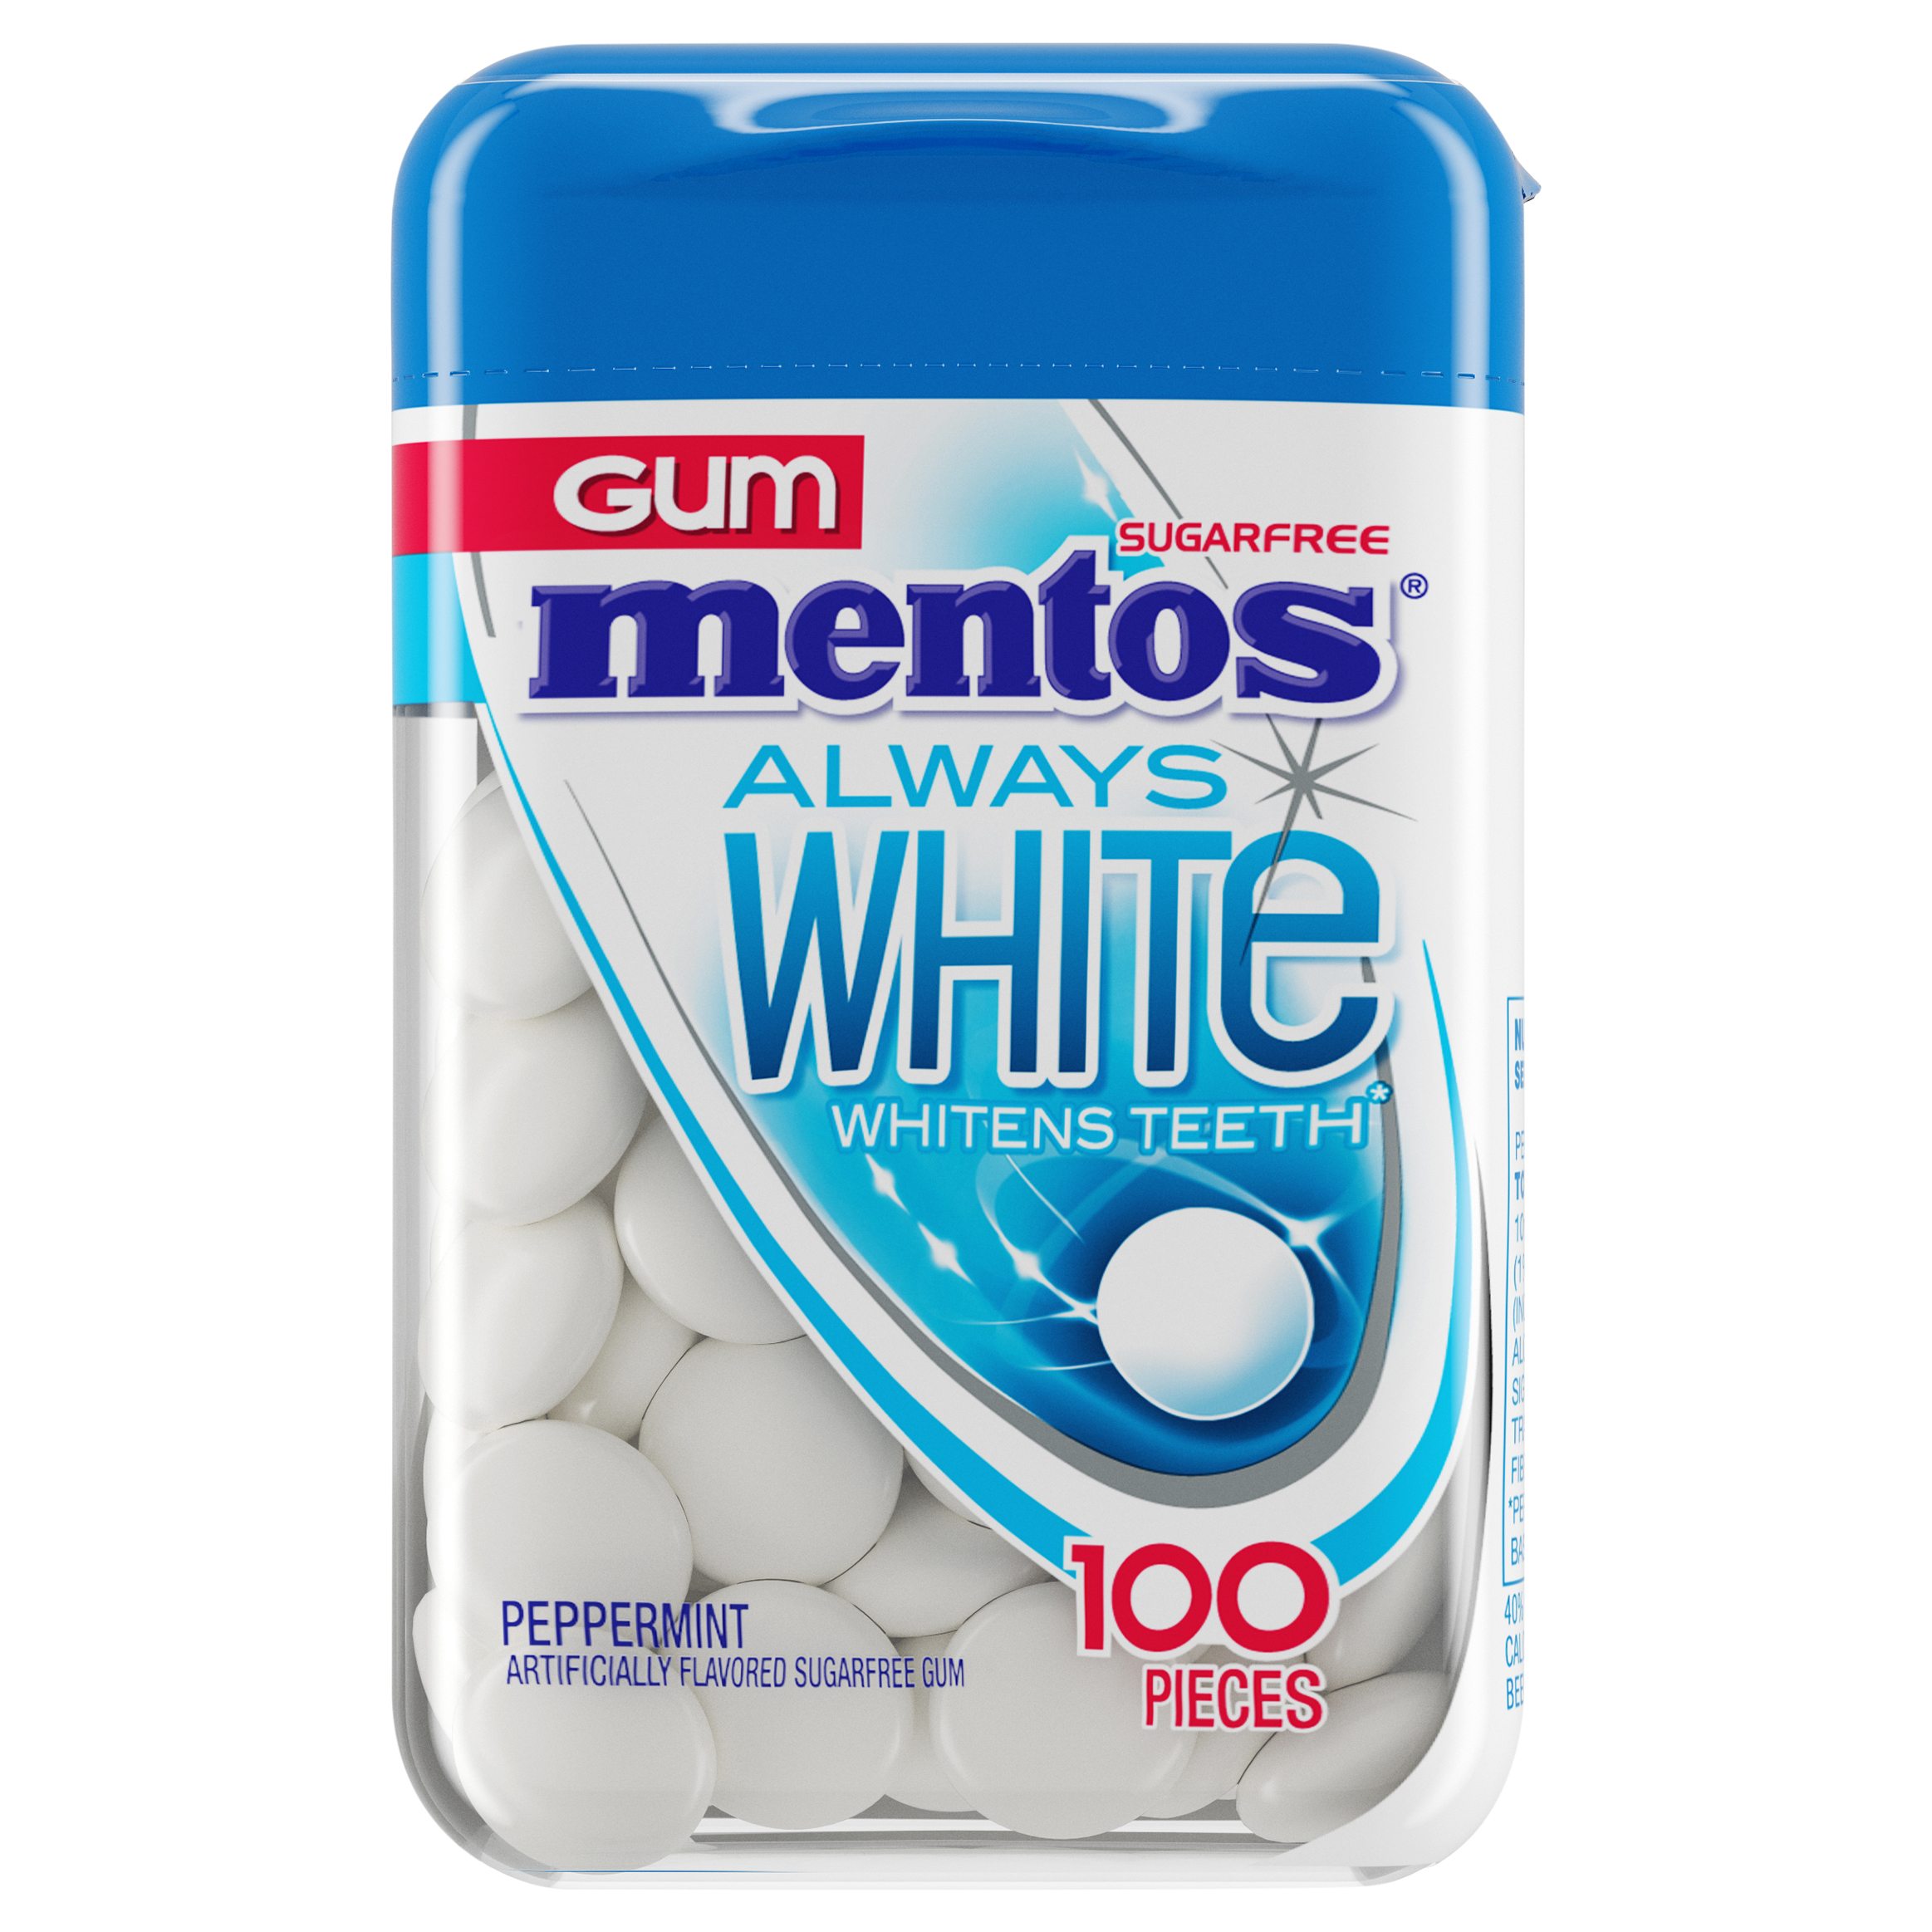 Mentos Always White Peppermint Flavored Gum, 100 Piece Bottle - image 4 of 4